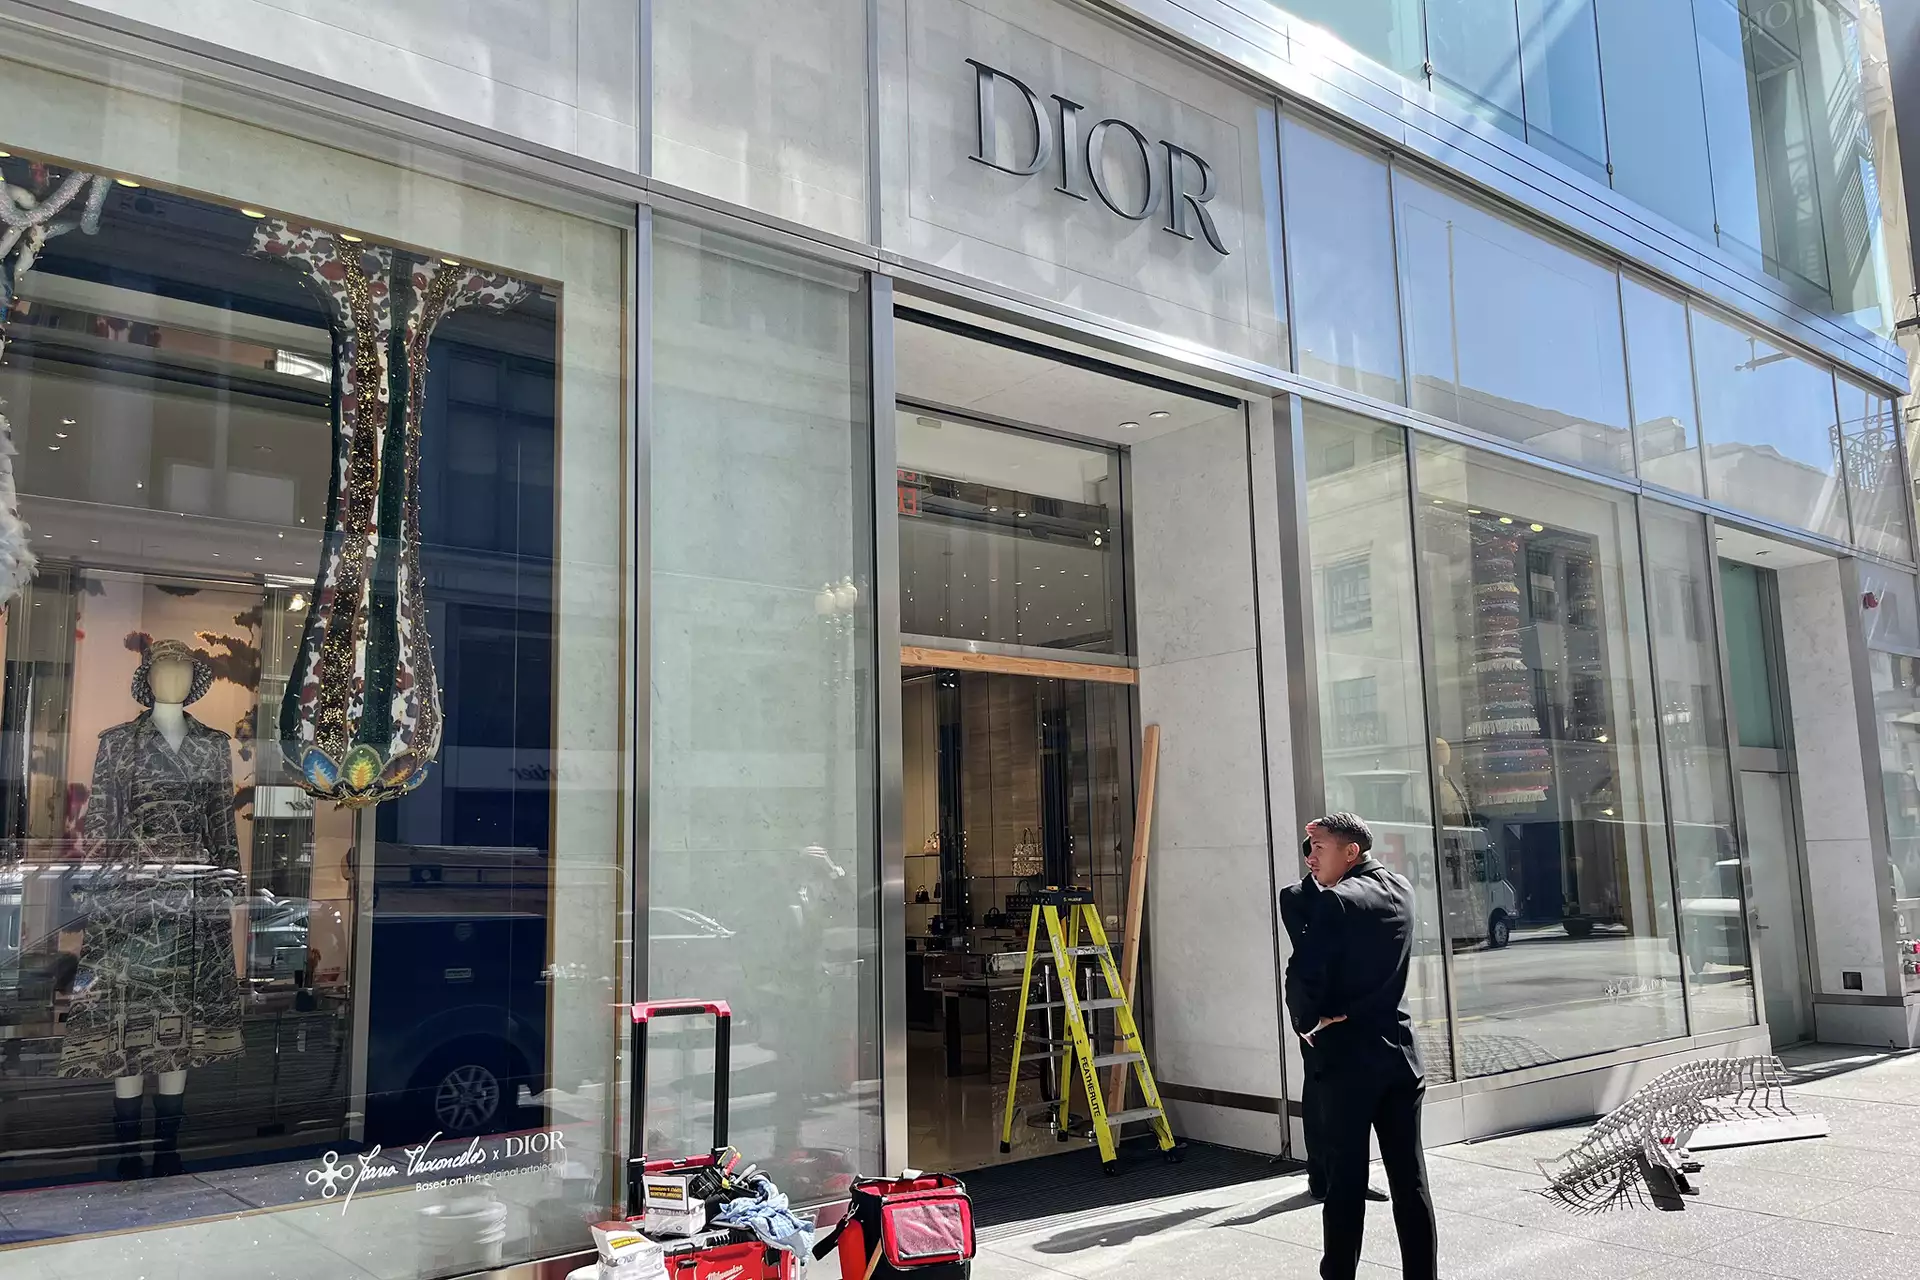 Robbery at San Francisco’s Dior Store Near Union Square Results in Arrest of Two Suspects